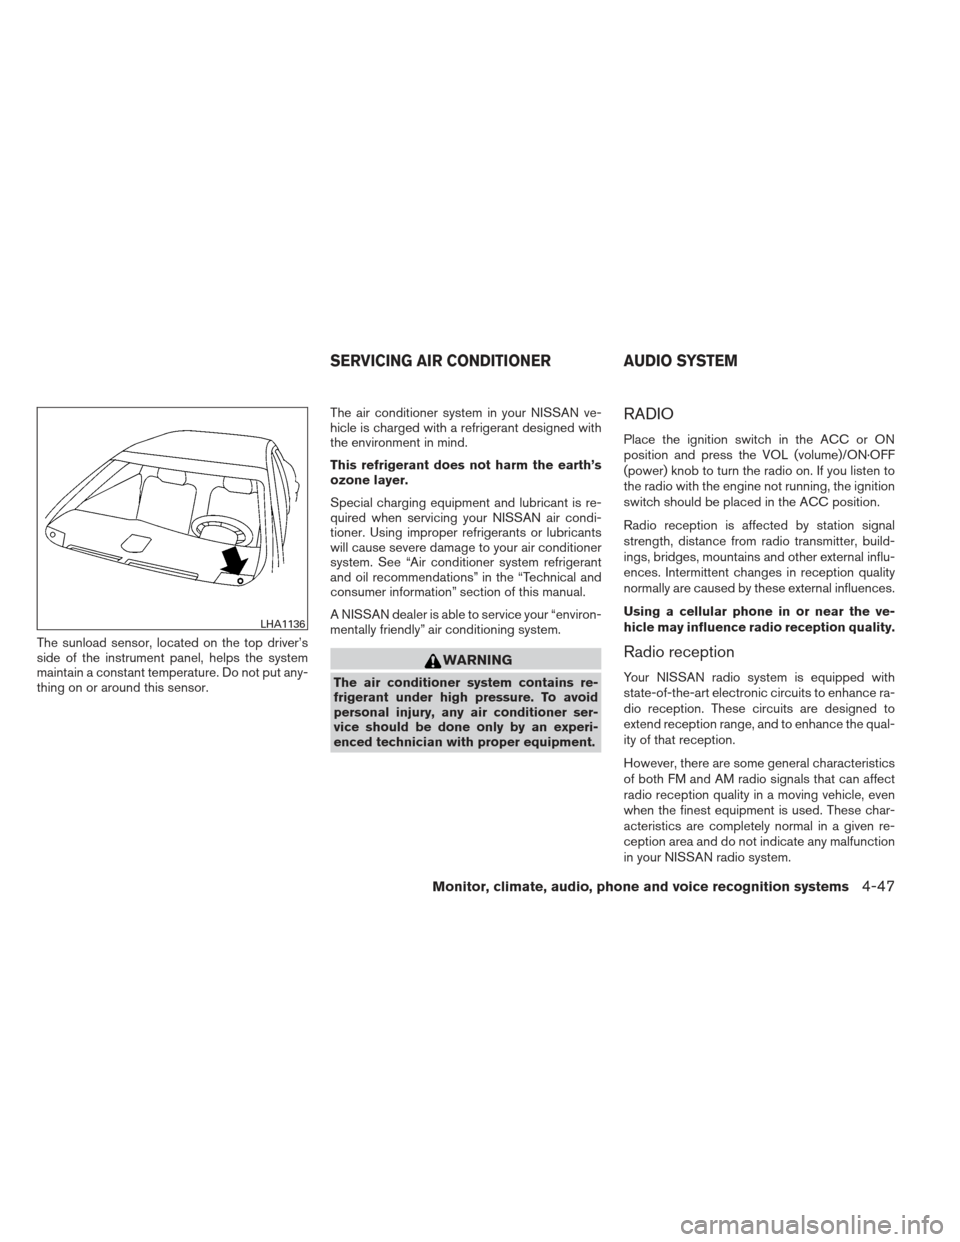 NISSAN MAXIMA 2013 A35 / 7.G Service Manual The sunload sensor, located on the top driver’s
side of the instrument panel, helps the system
maintain a constant temperature. Do not put any-
thing on or around this sensor.The air conditioner sys